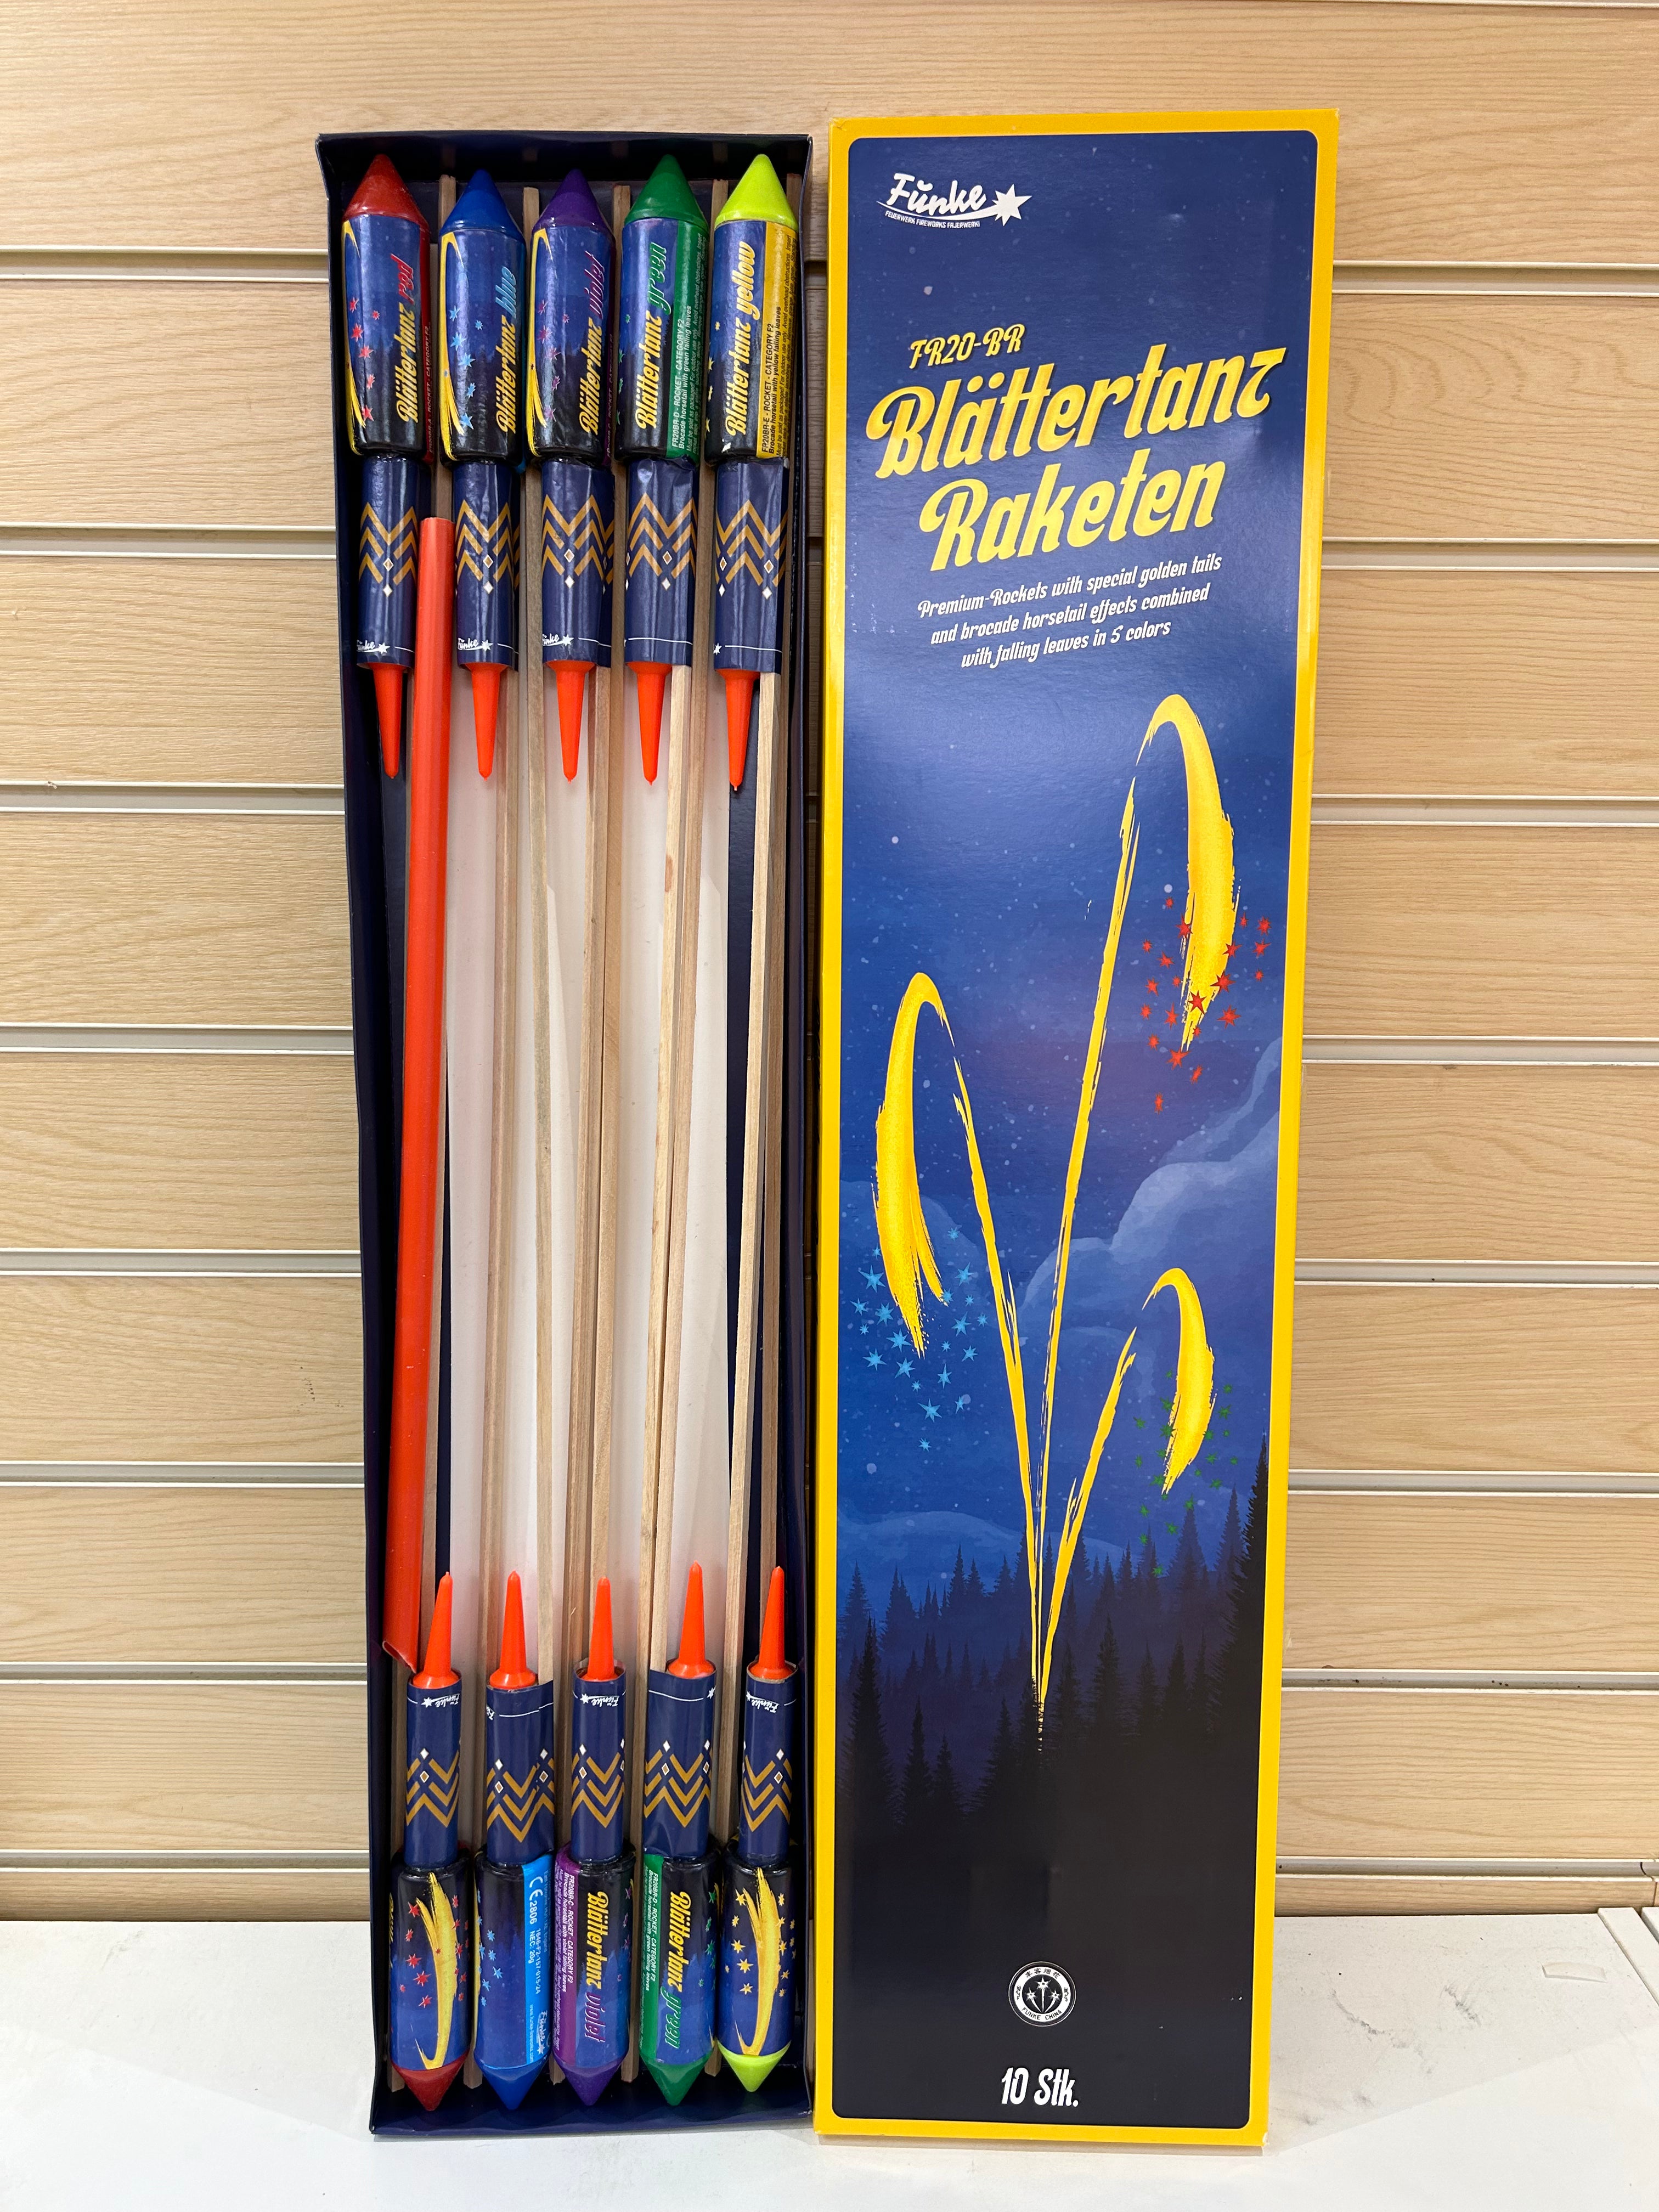 Blattertanz Rakeren Rockets ( Low Noise , box of 10 ) THESE HAVE TO BE THE BEST HORSETAIL EFFECT ROCKETS ON THE MARKET, WOW !! )